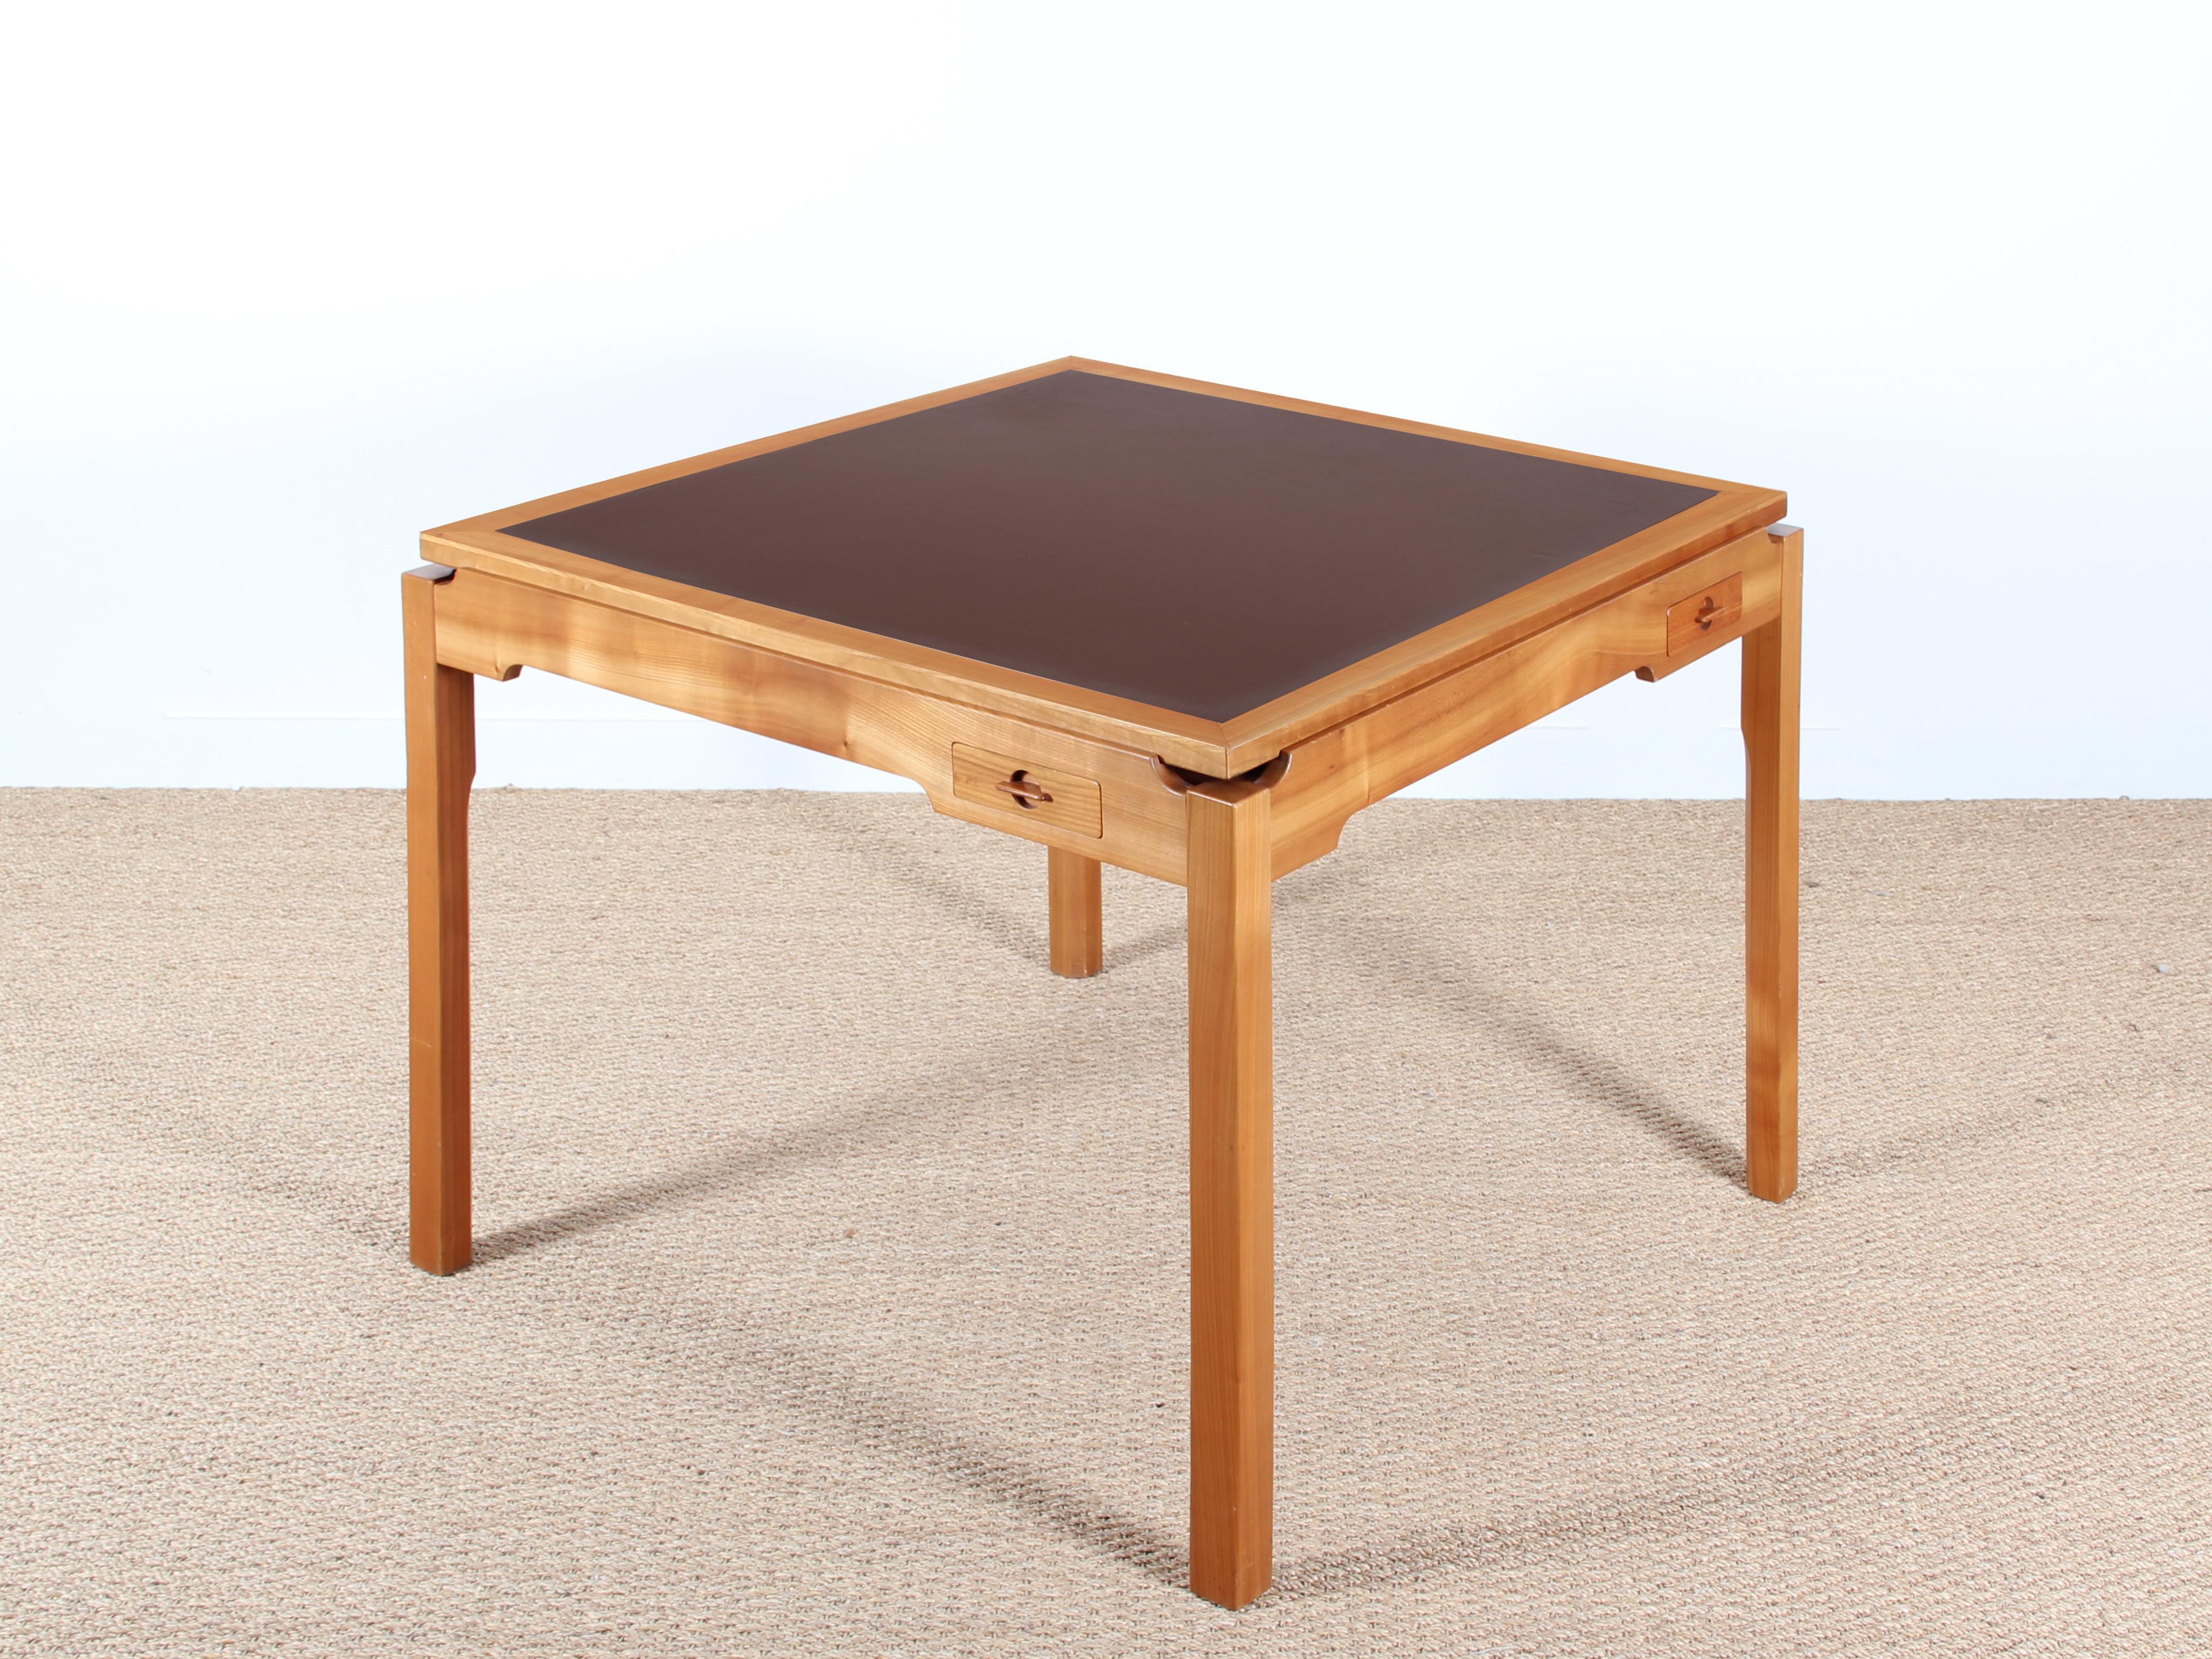 Mid-Century Modern scandinavian square game table by Gorm Lindum et Rolf Middelboe. Referenced by the Design Museum Denmark under number RP04078.